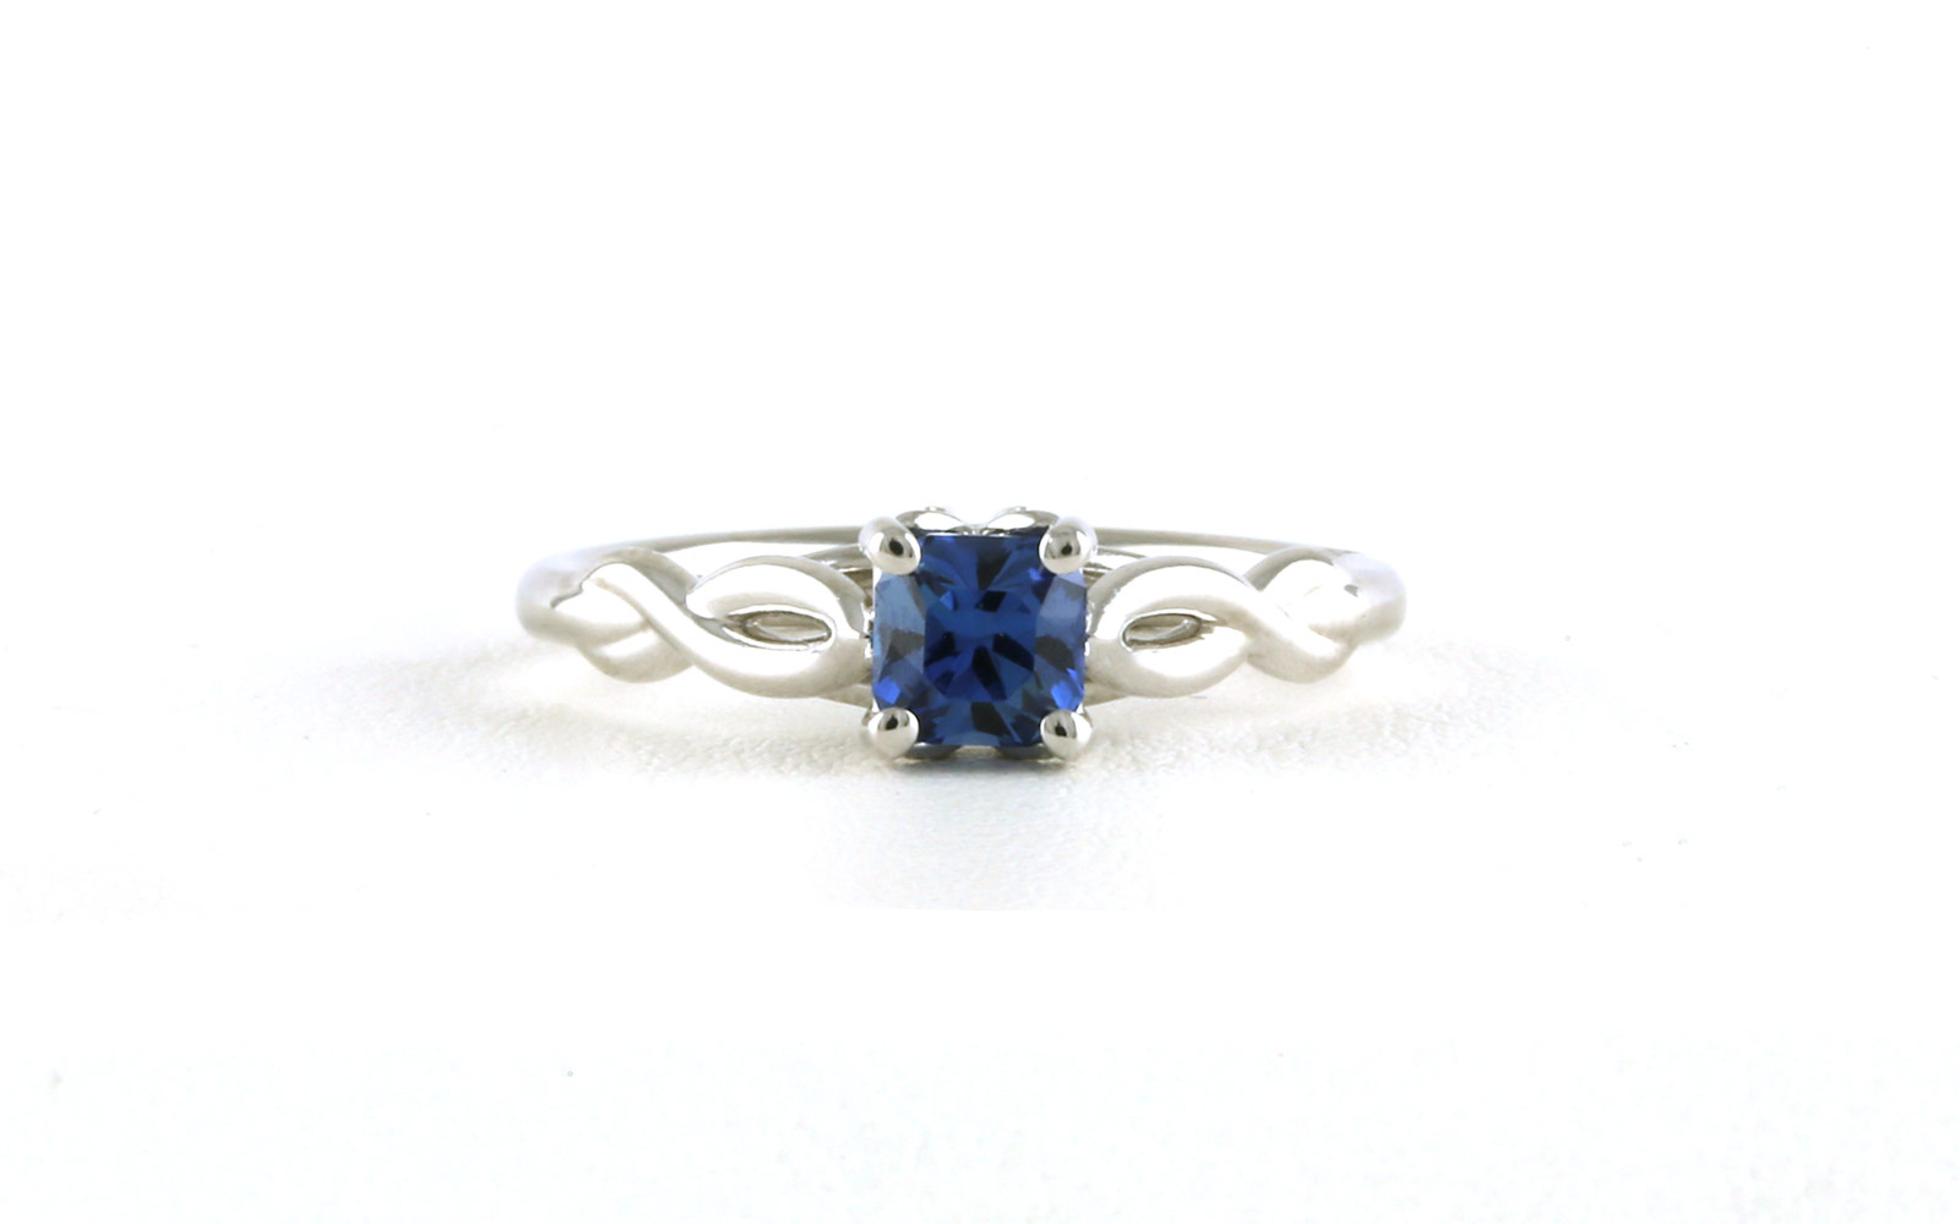 Woven Solitaire-style Radiant-cut Montana Yogo Sapphire Ring in White Gold (0.66cts)